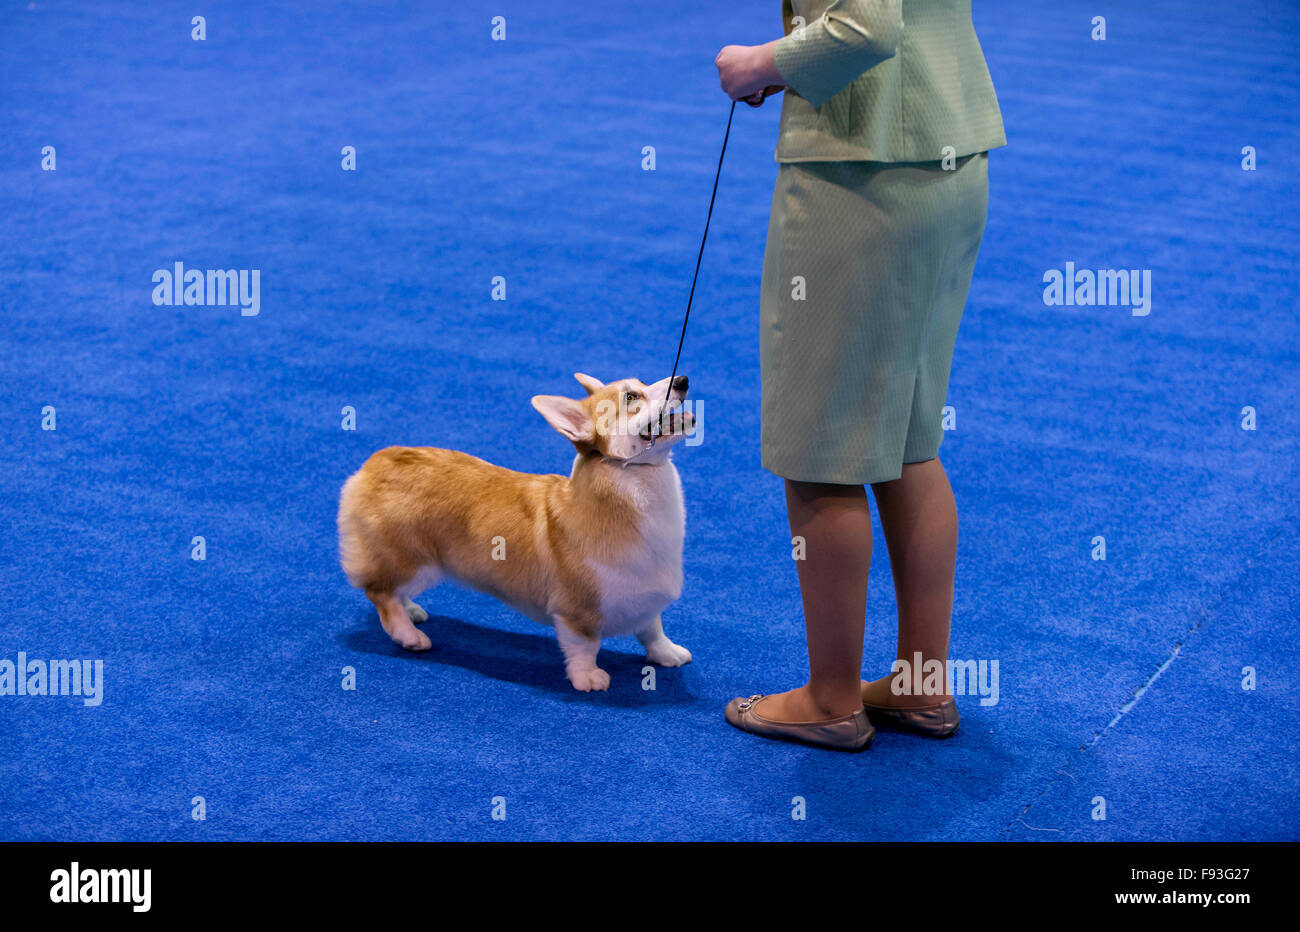 Orlando, Florida, USA. 13th Dec, 2015. A Pembroke Welsh Corgi during competition at the 2015 AKC/Eukanuba Championships. With over 6,100 entries, this is the largest dog show held in the United States in the last 20 years. © Brian Cahn/ZUMA Wire/Alamy Live News Stock Photo